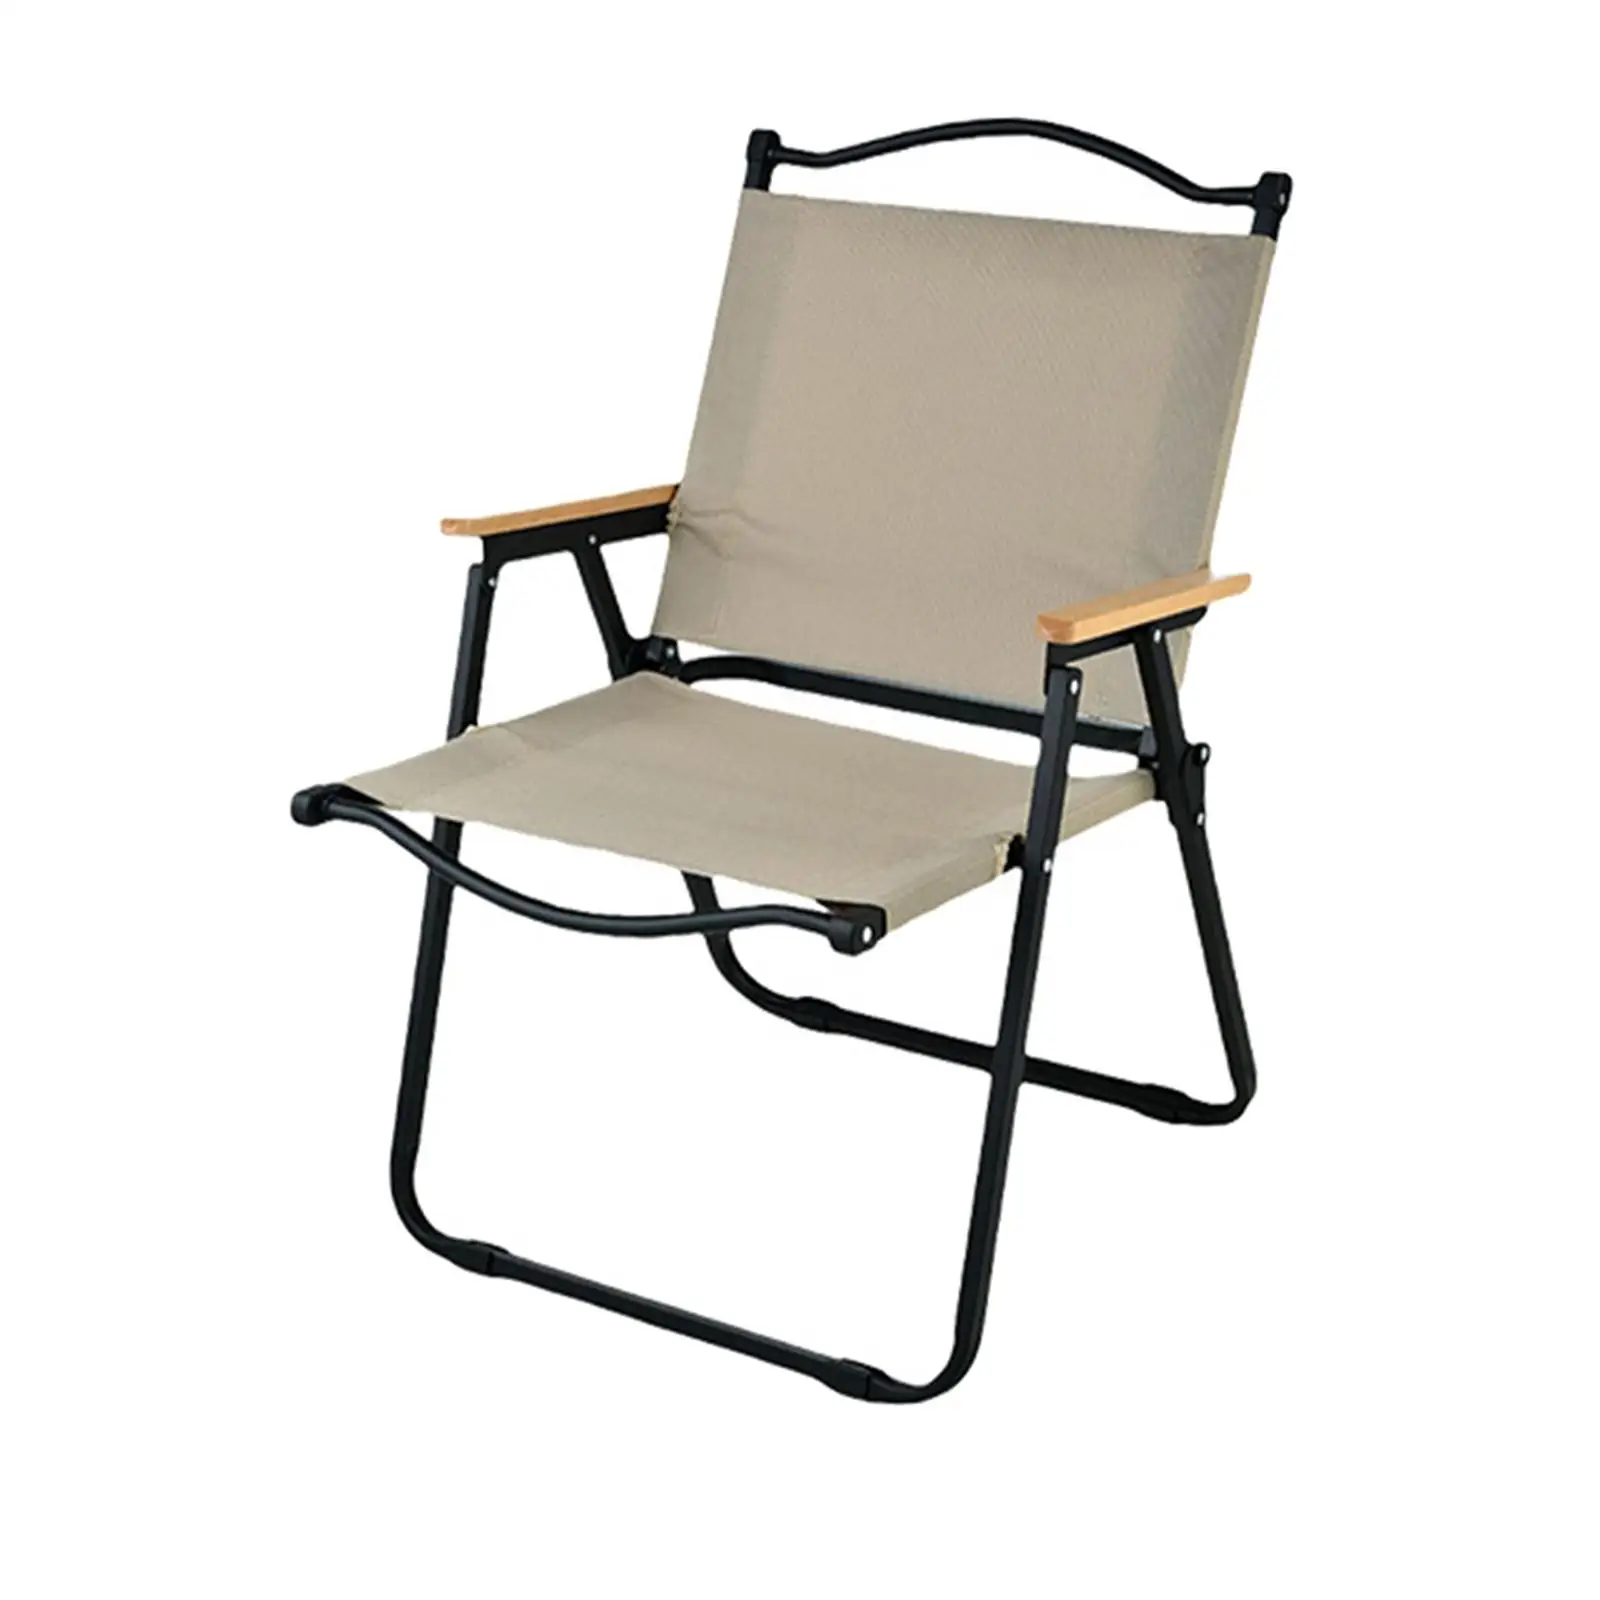 Portable Outdoor Folding Chair Camping Chair Portable Outdoor Lightweight Foldable Chair